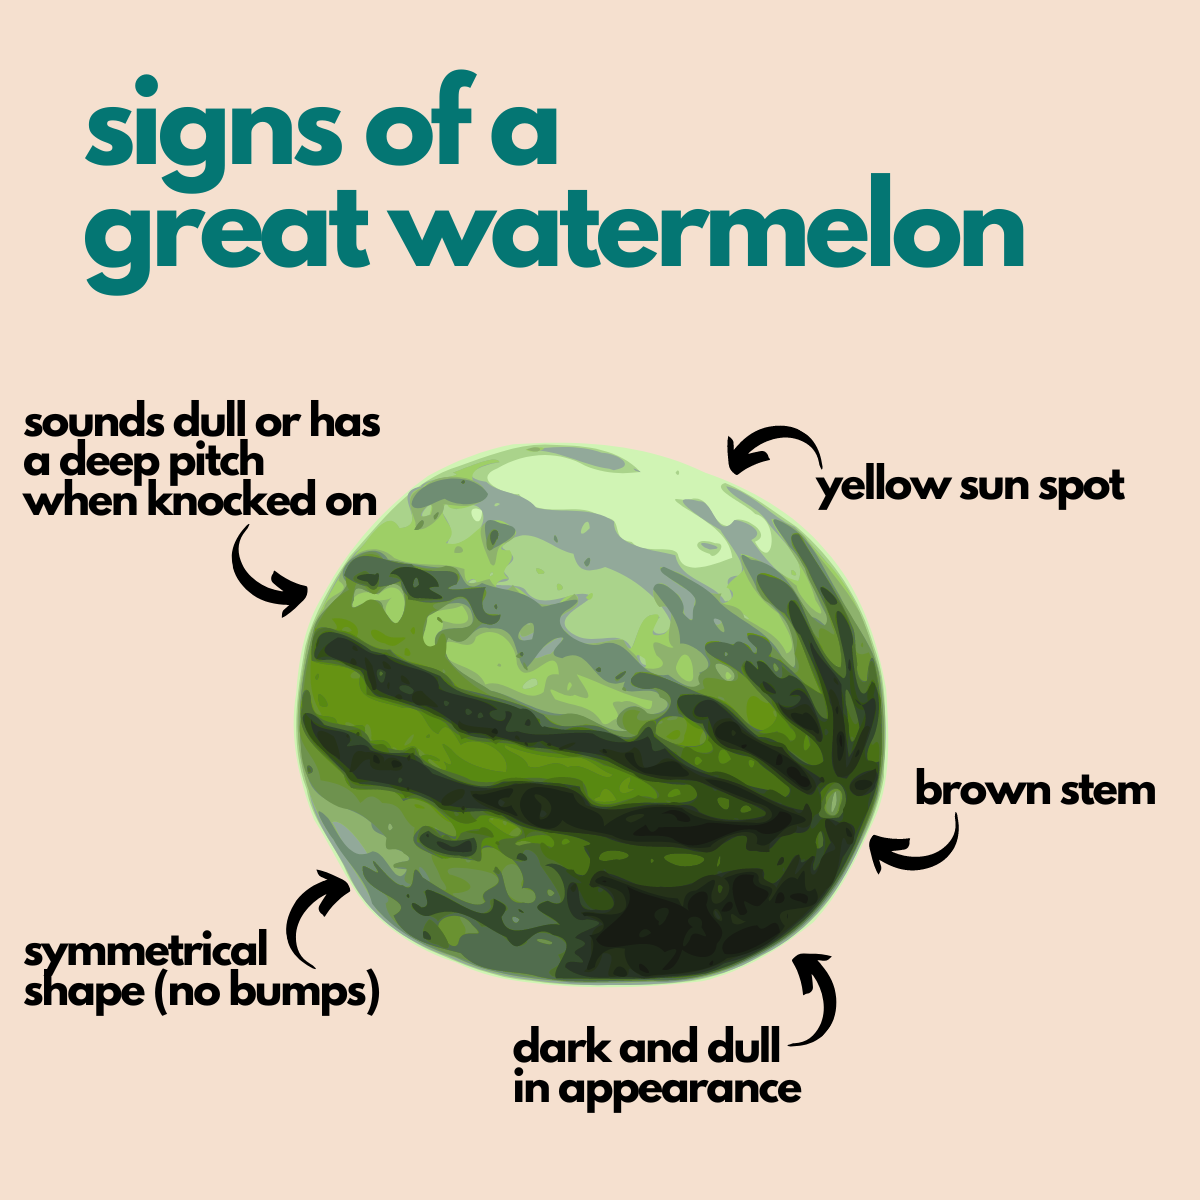 Signs of a great watermelon graphic including sound, color, stem appearance, and a sun spot.